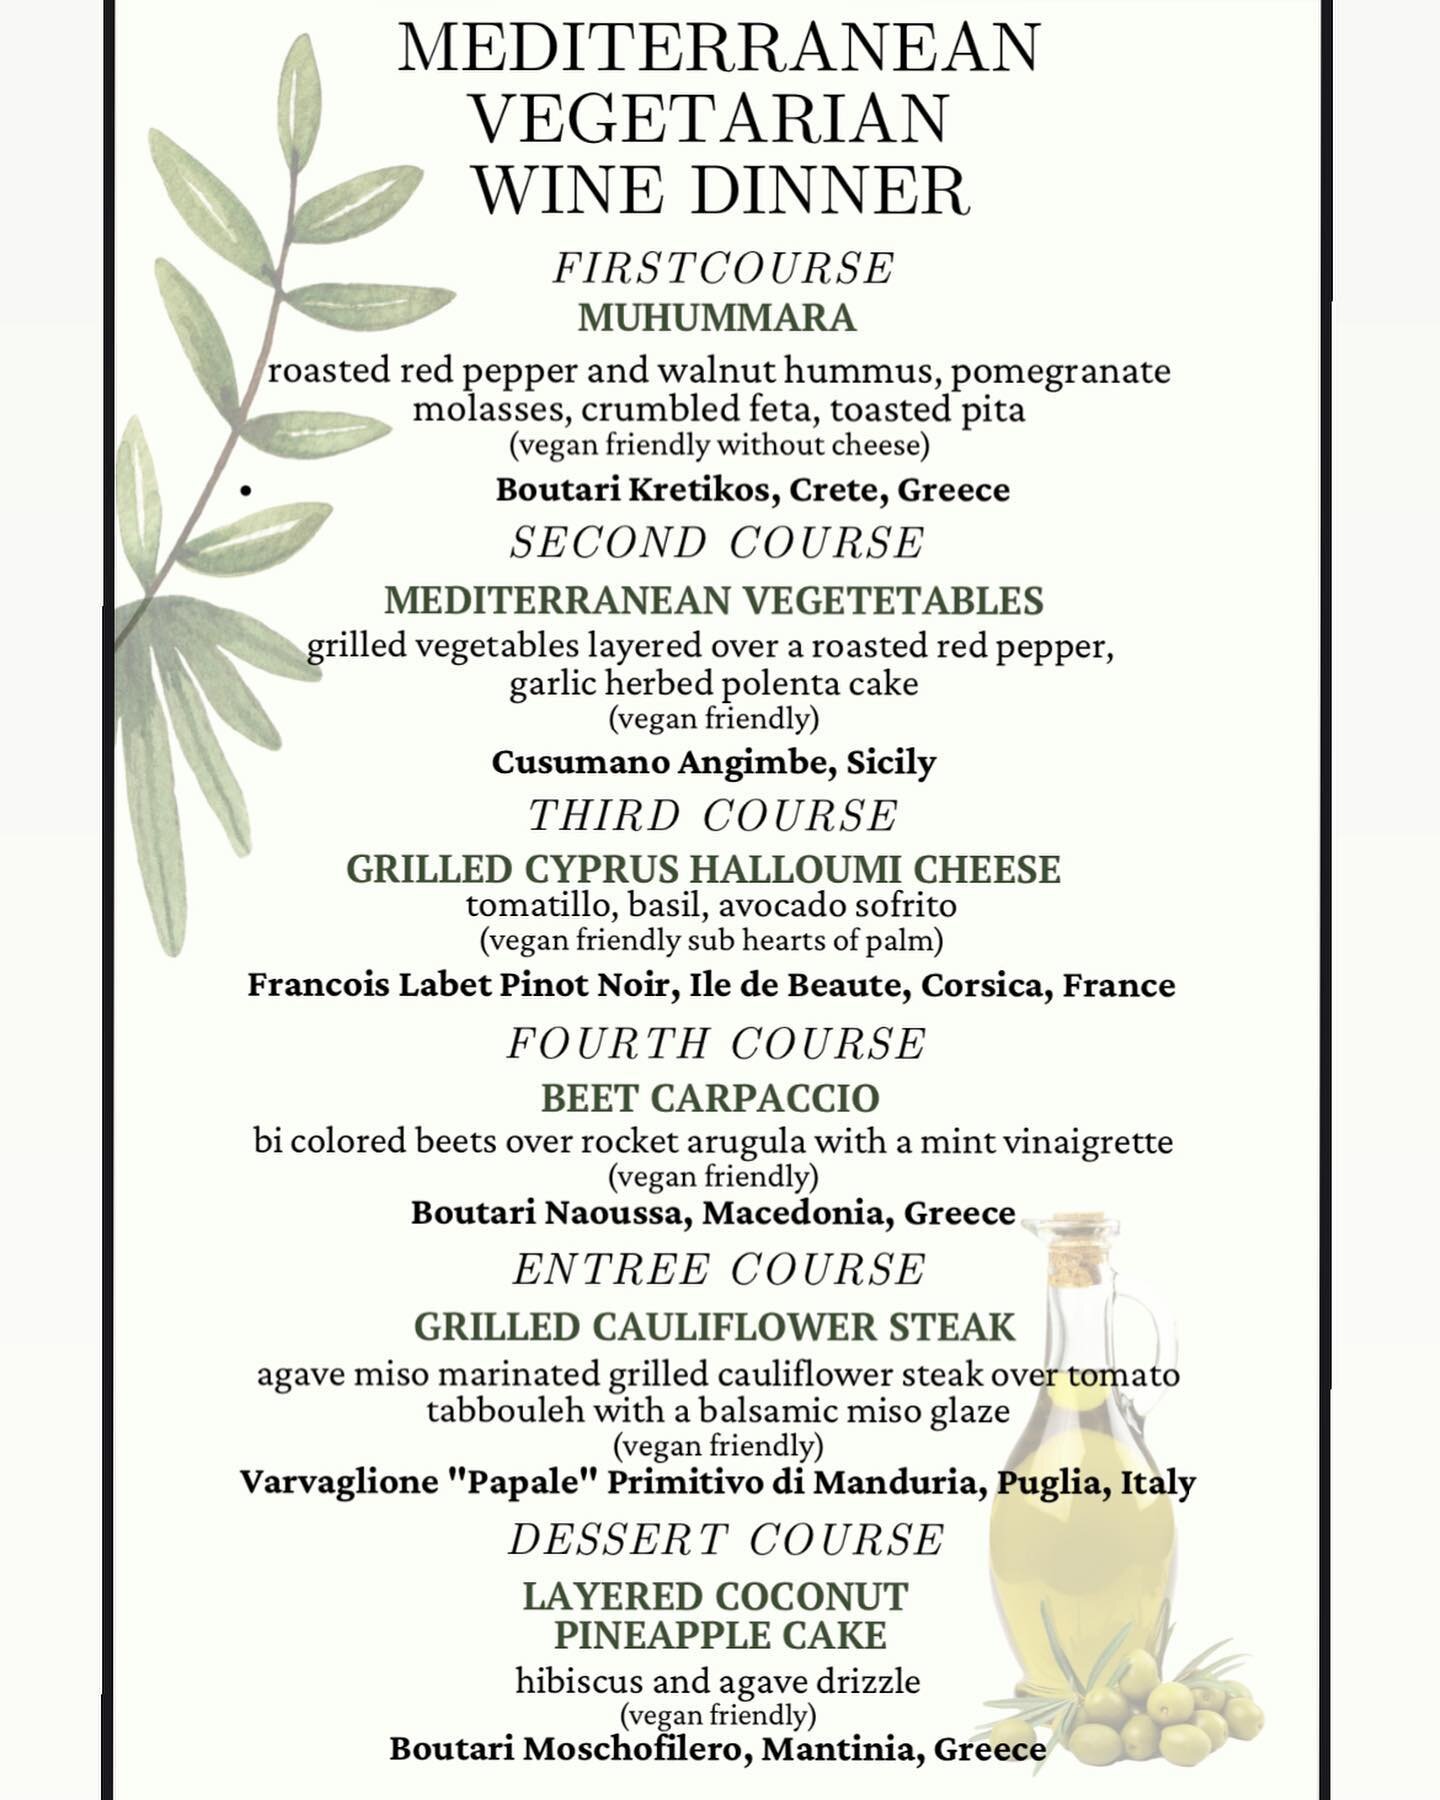 Our menu for our Mediterranean Vegetarian Wine Dinner!! 
We are so excited for this event. The flavors that our chef has paired with these wonderful wines are absolutely delicious!! 
Head over to our website now to grab your tickets!

#winedinner #me